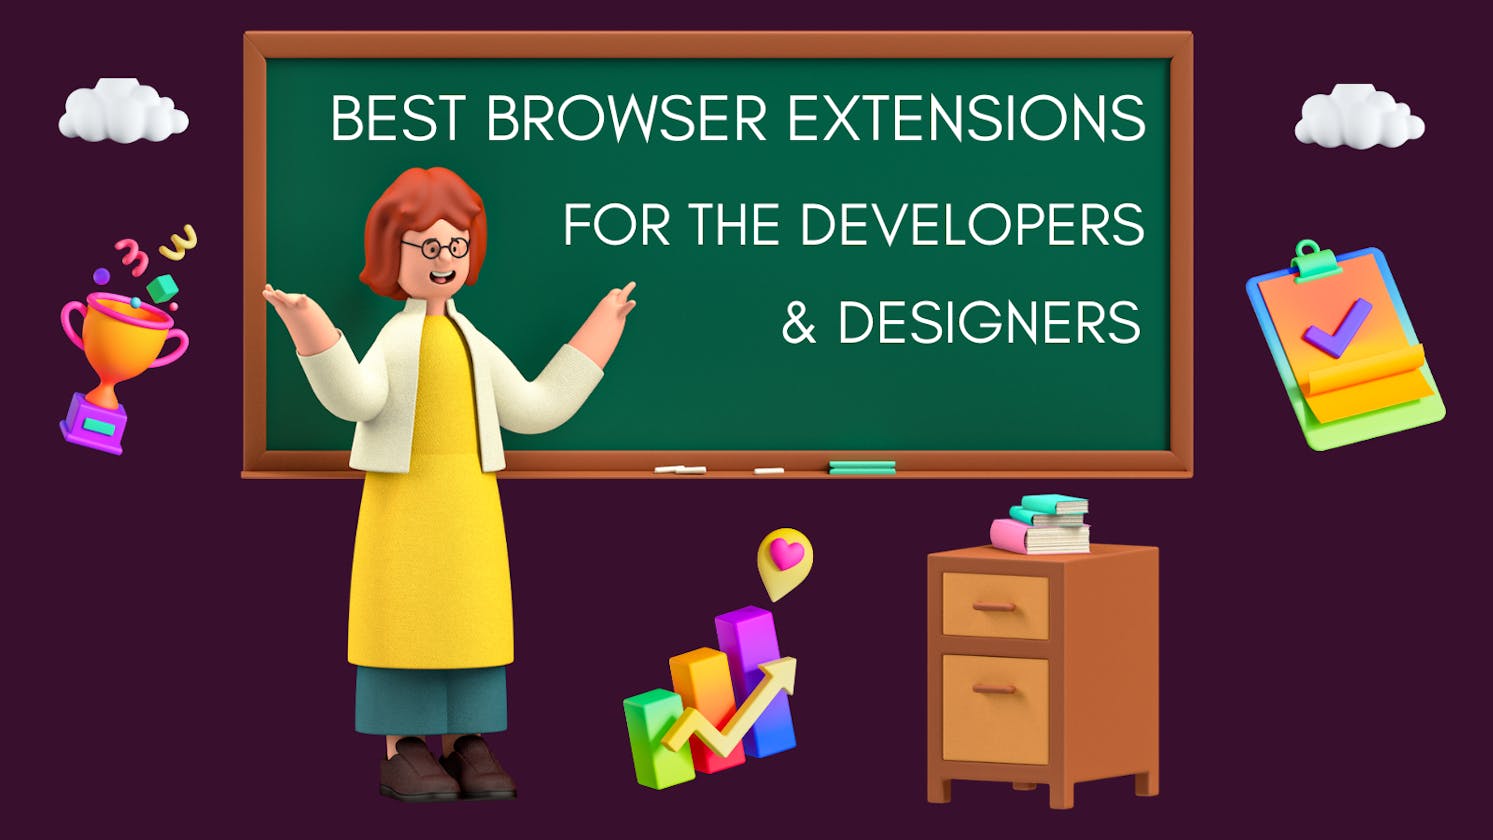 Best Browser Extensions For The Developer & Designers